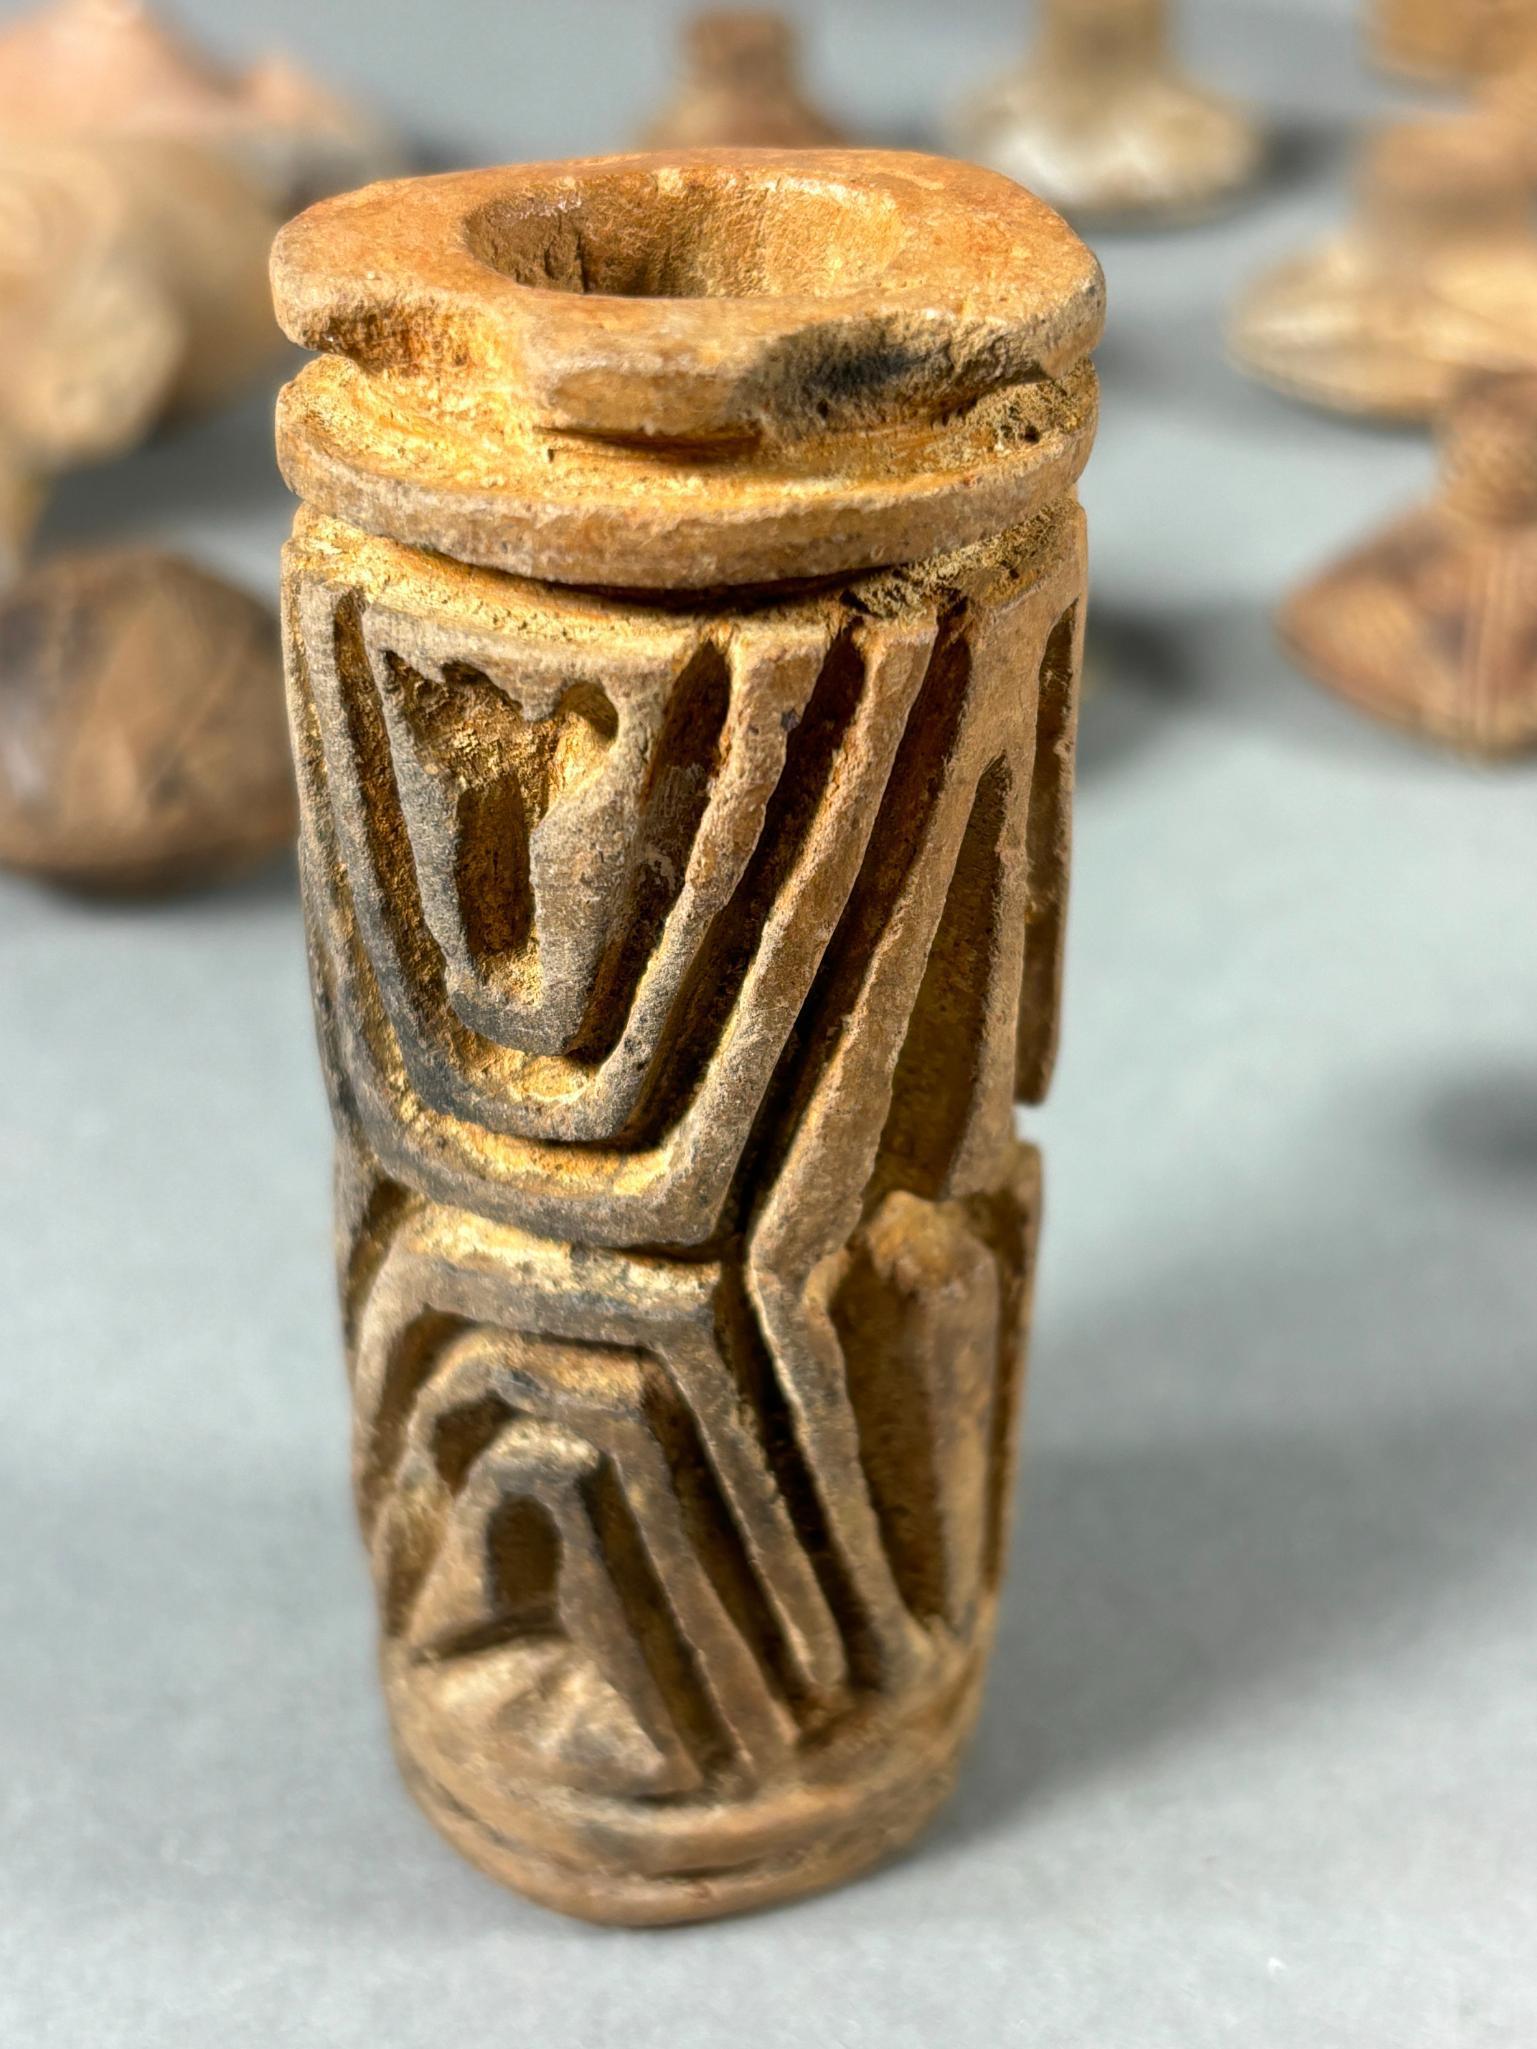 Large Group Pre Columbian Carved Faces, Spindle Whorls & Beads